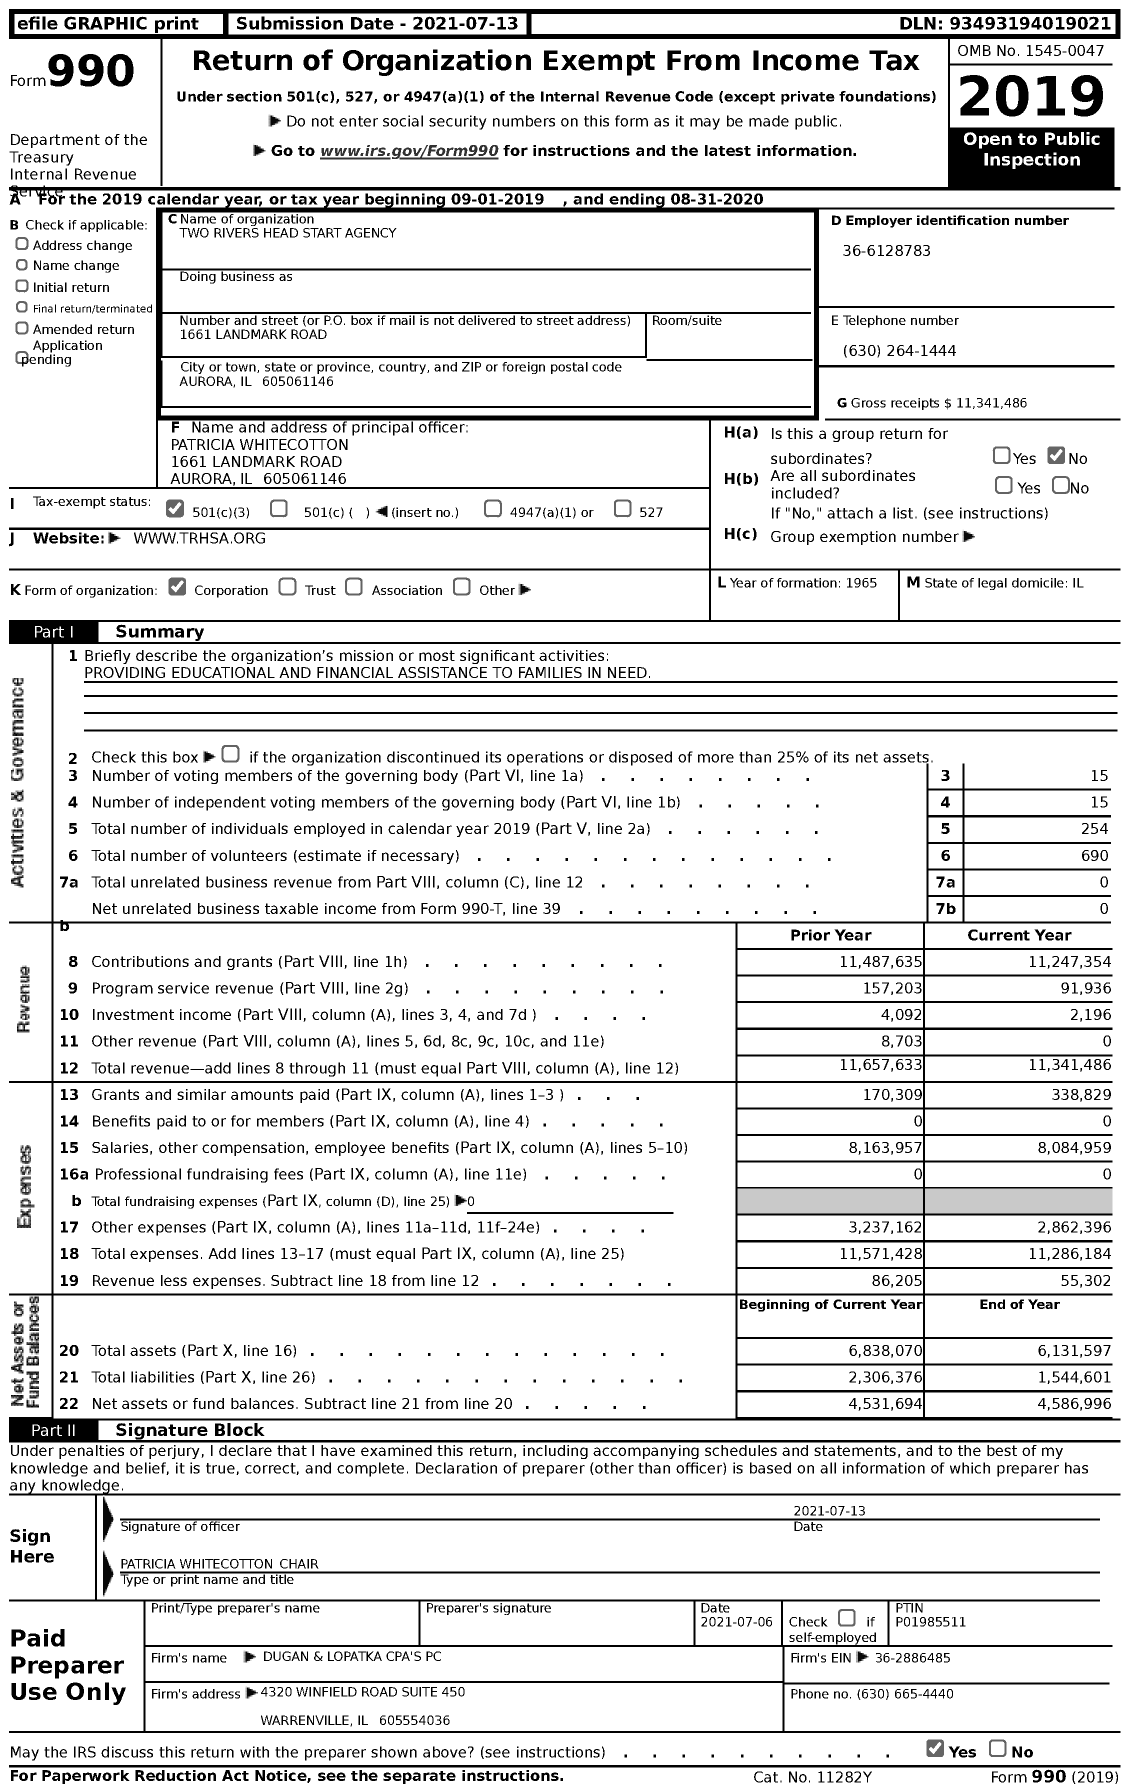 Image of first page of 2019 Form 990 for Two Rivers Head Start Agency